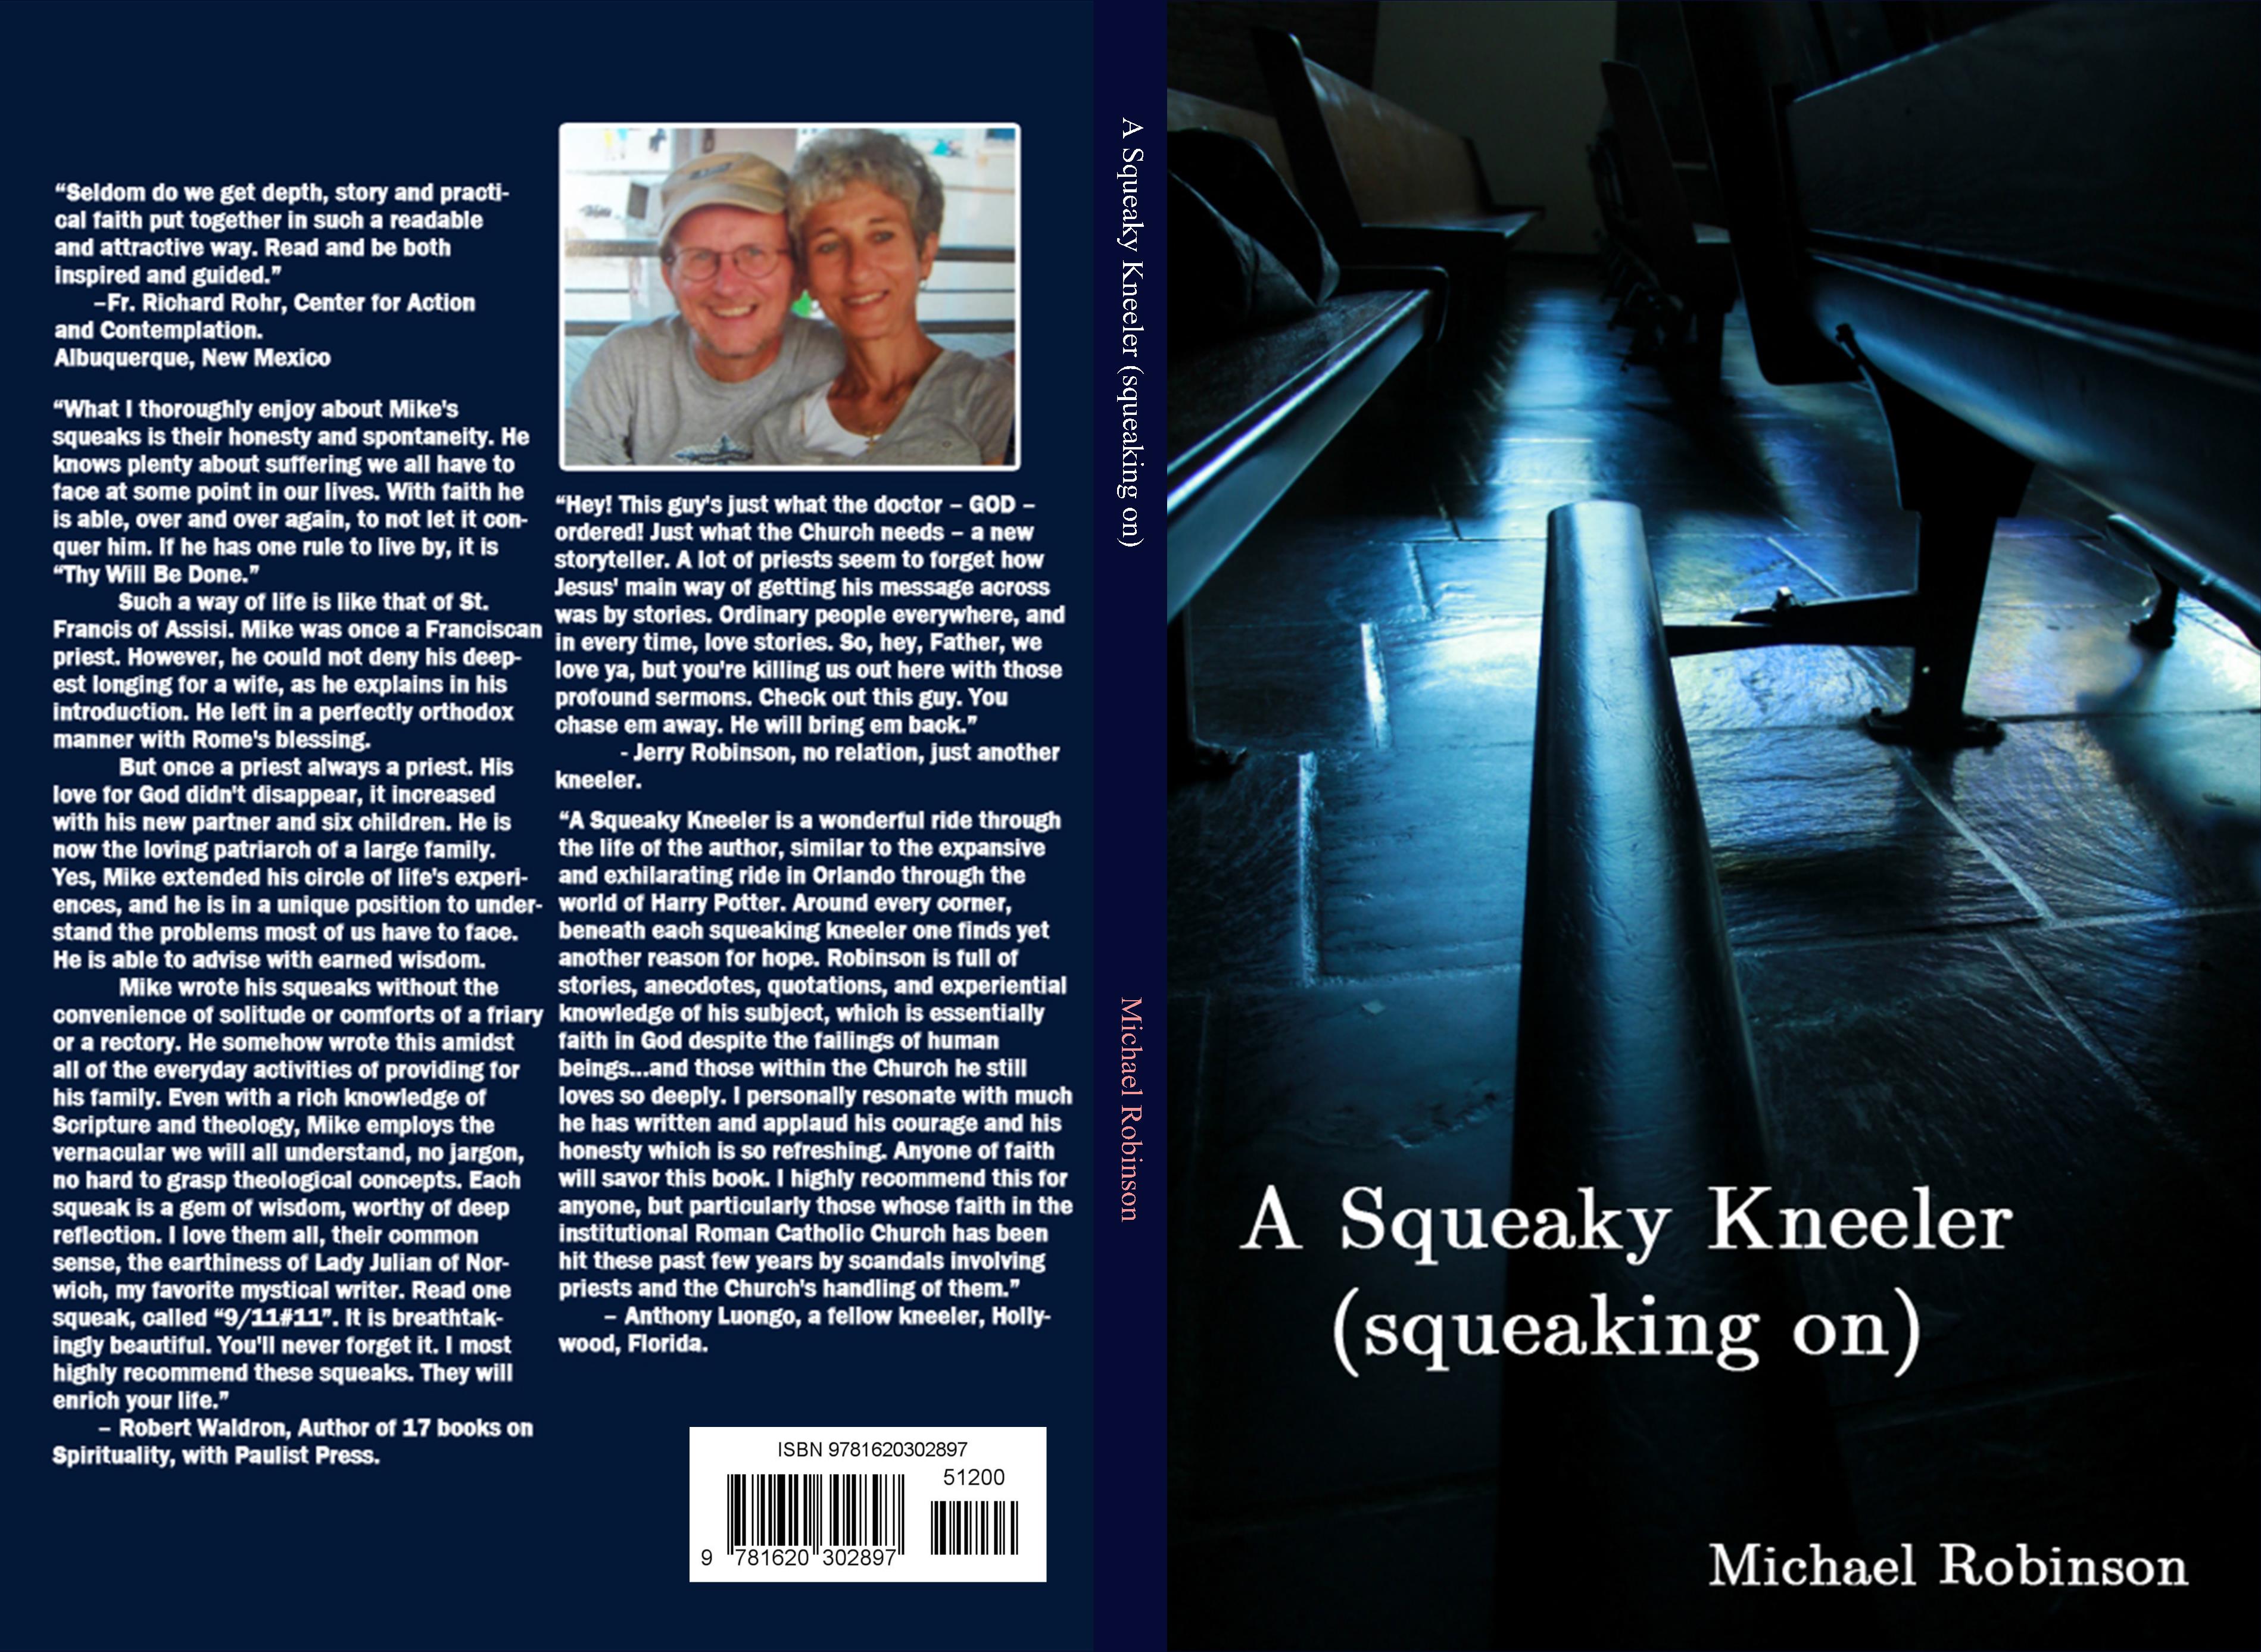 A Squeaky Kneeler (squeaking on) cover image